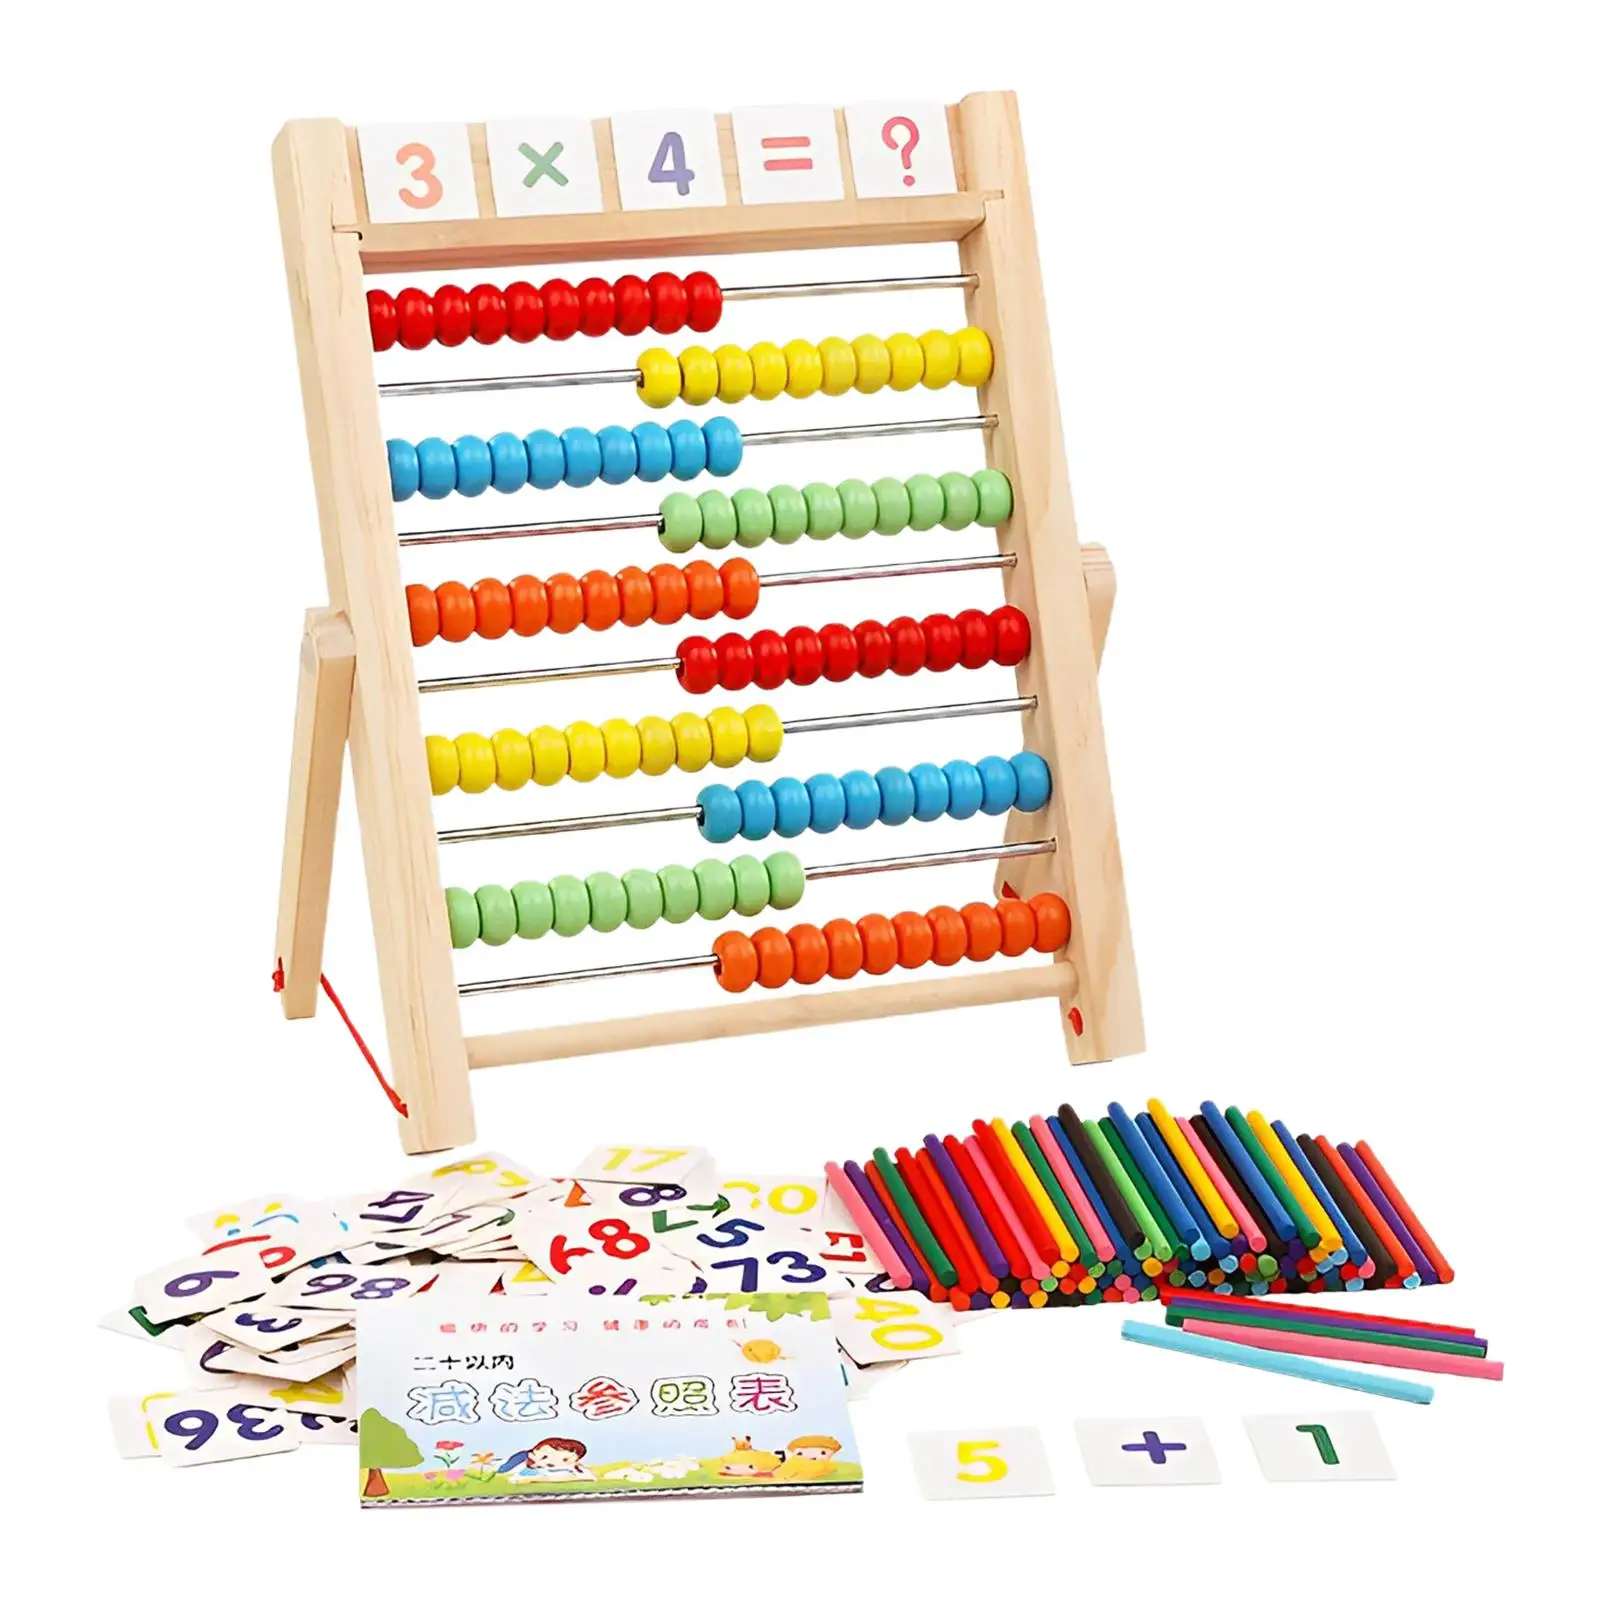 Colorful Wooden Abacus Number Learning Counting Sticks 10 Row Educational Abacus for Kindergarten Kids Elementary Toddlers